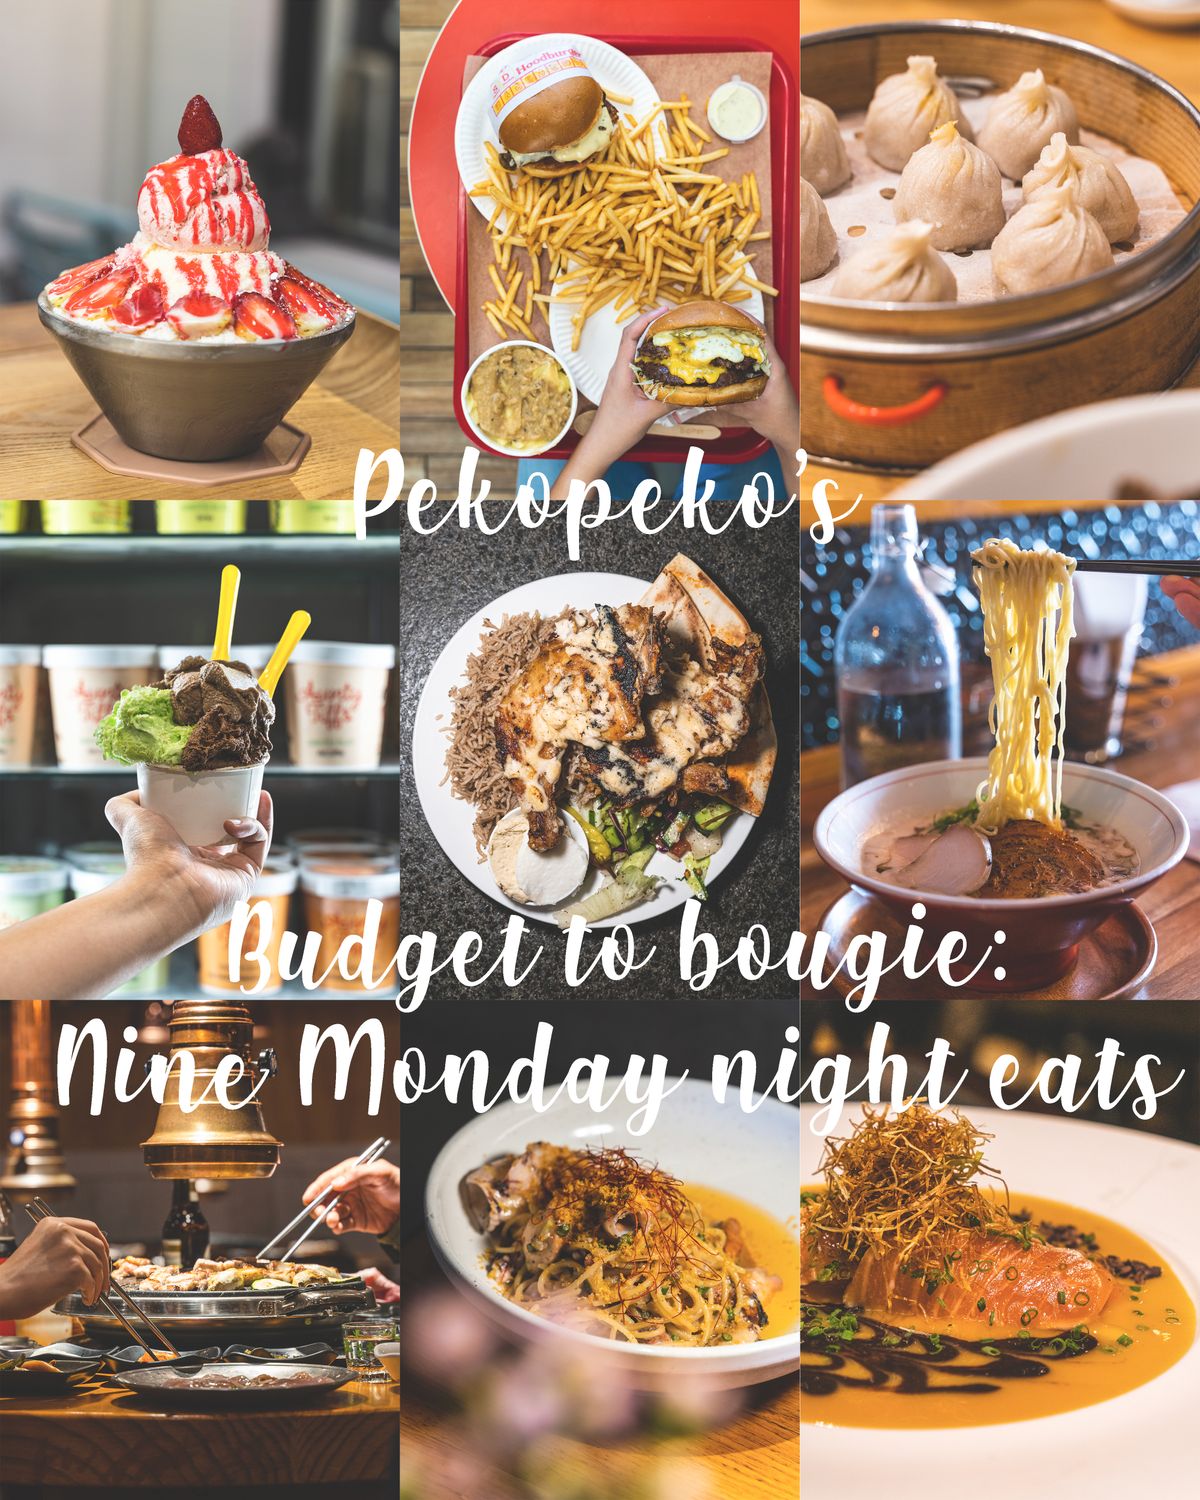 Budget to Bougie: Nine Monday night eats in Perth